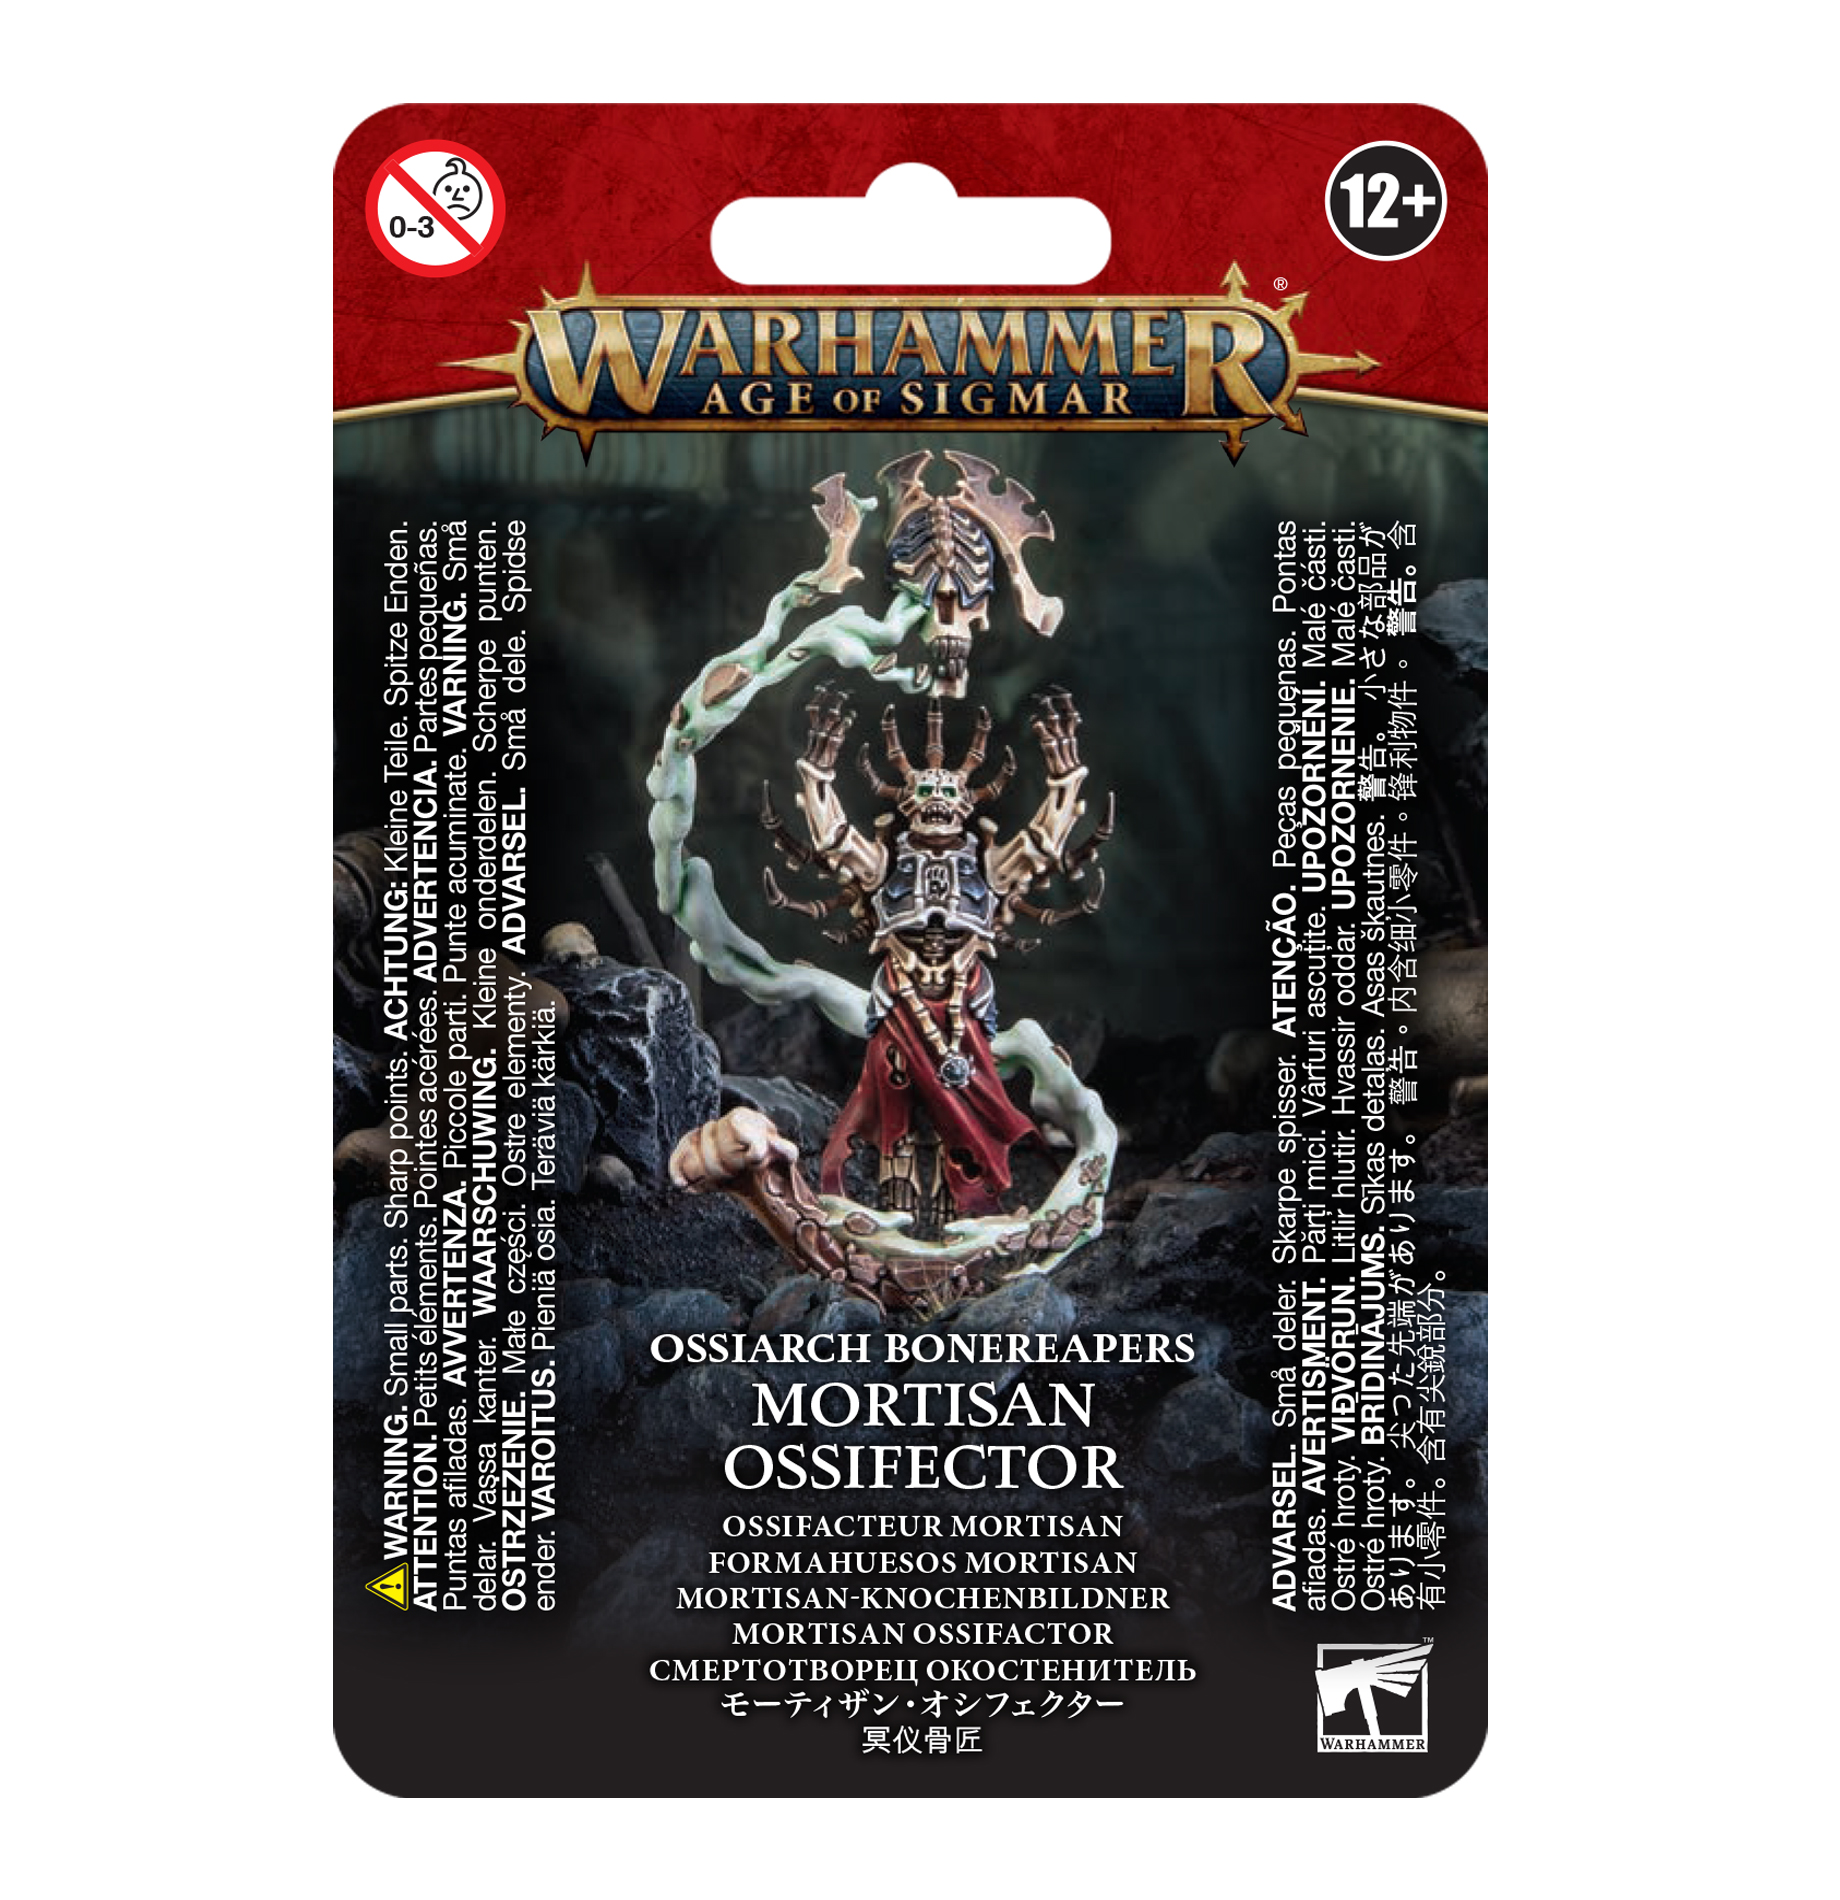 Warhammer Age Of Sigmar: Ossiarch Bonereapers: Mortisan Ossifector 